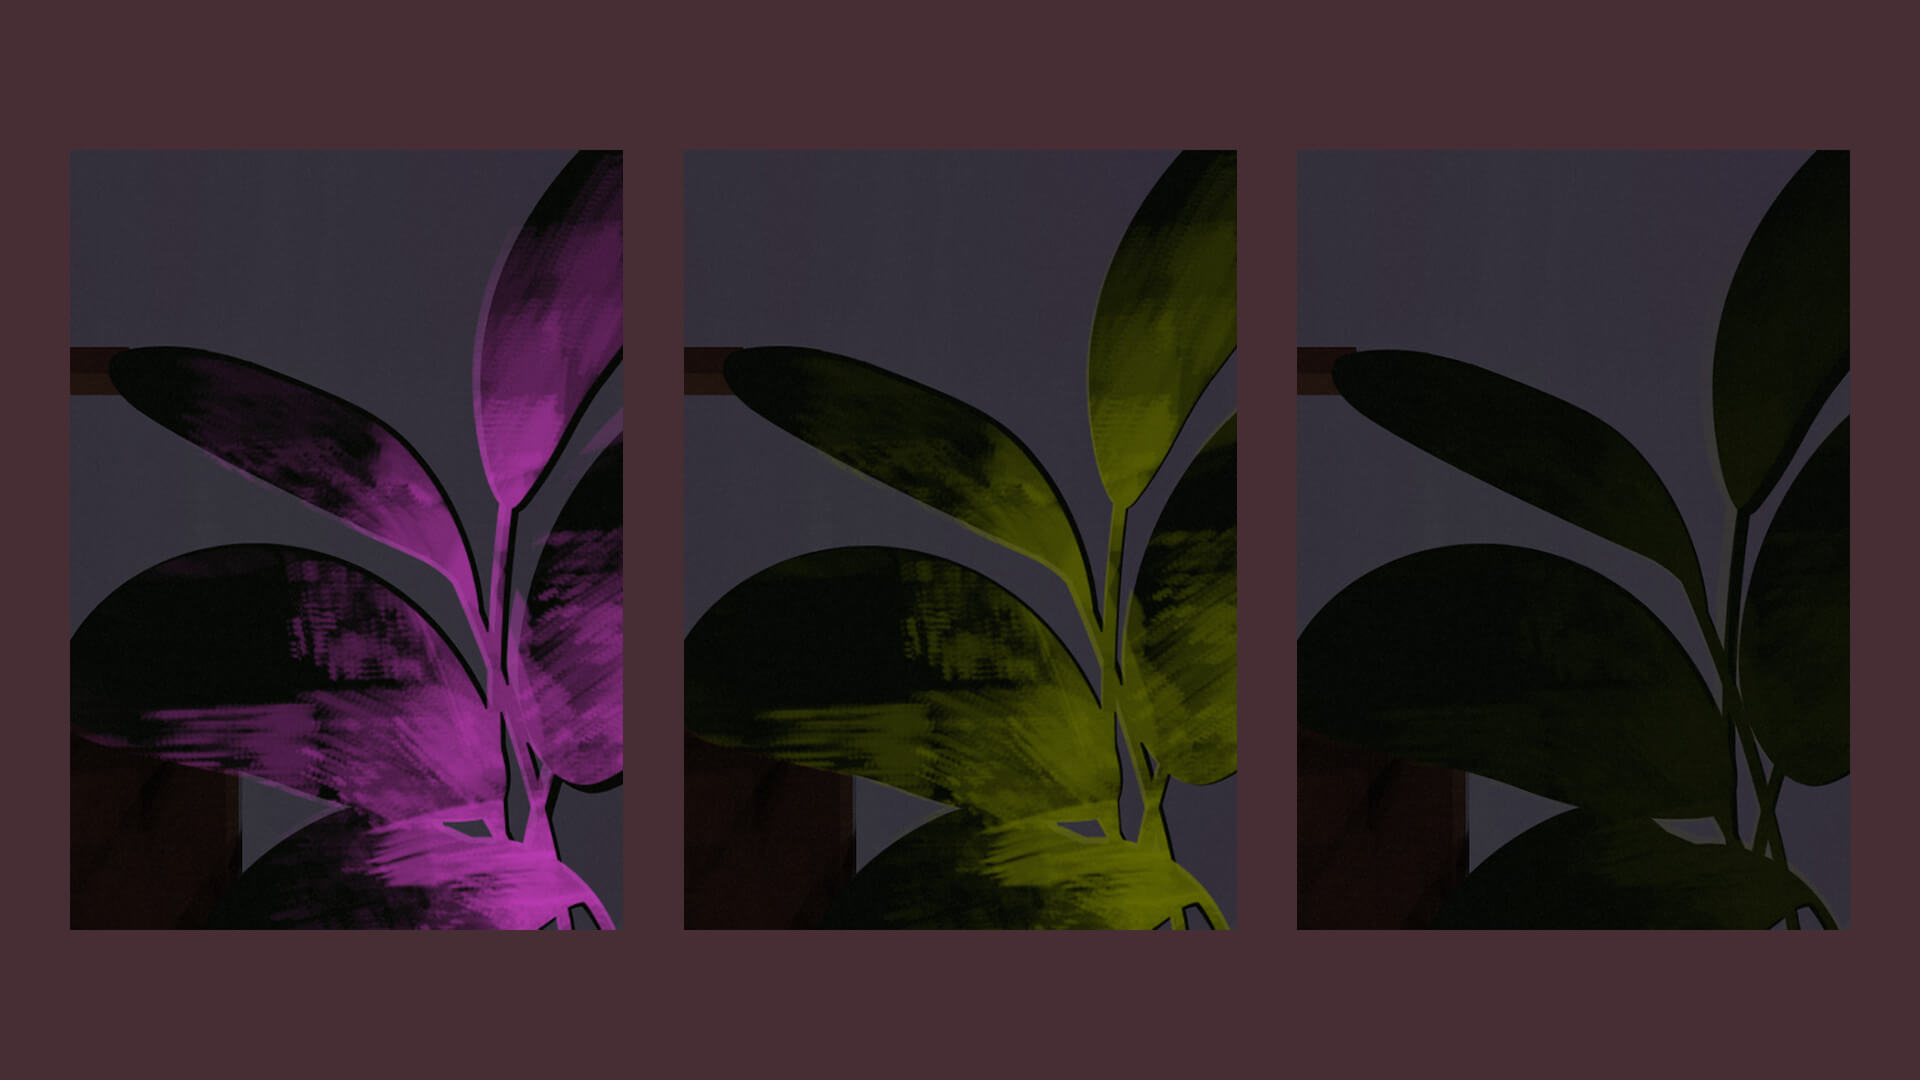 Comparison of three plants: the first has the vivid fuchsia texture on top of the black plant shape, the second changes the texture to be green, and the third's texture is dimmed to be only slightly visible.